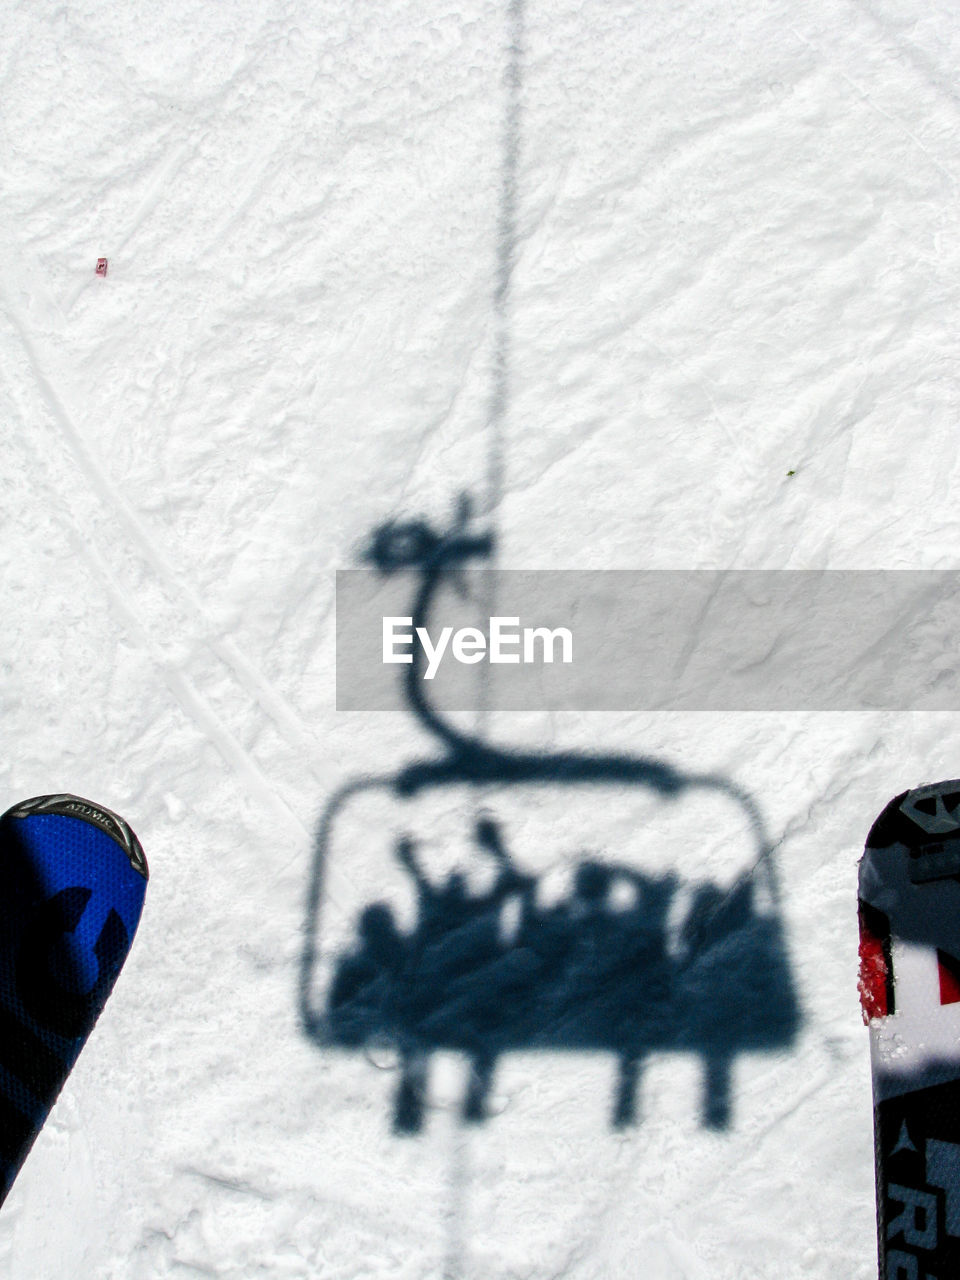 Shadow of people in ski lift on snow